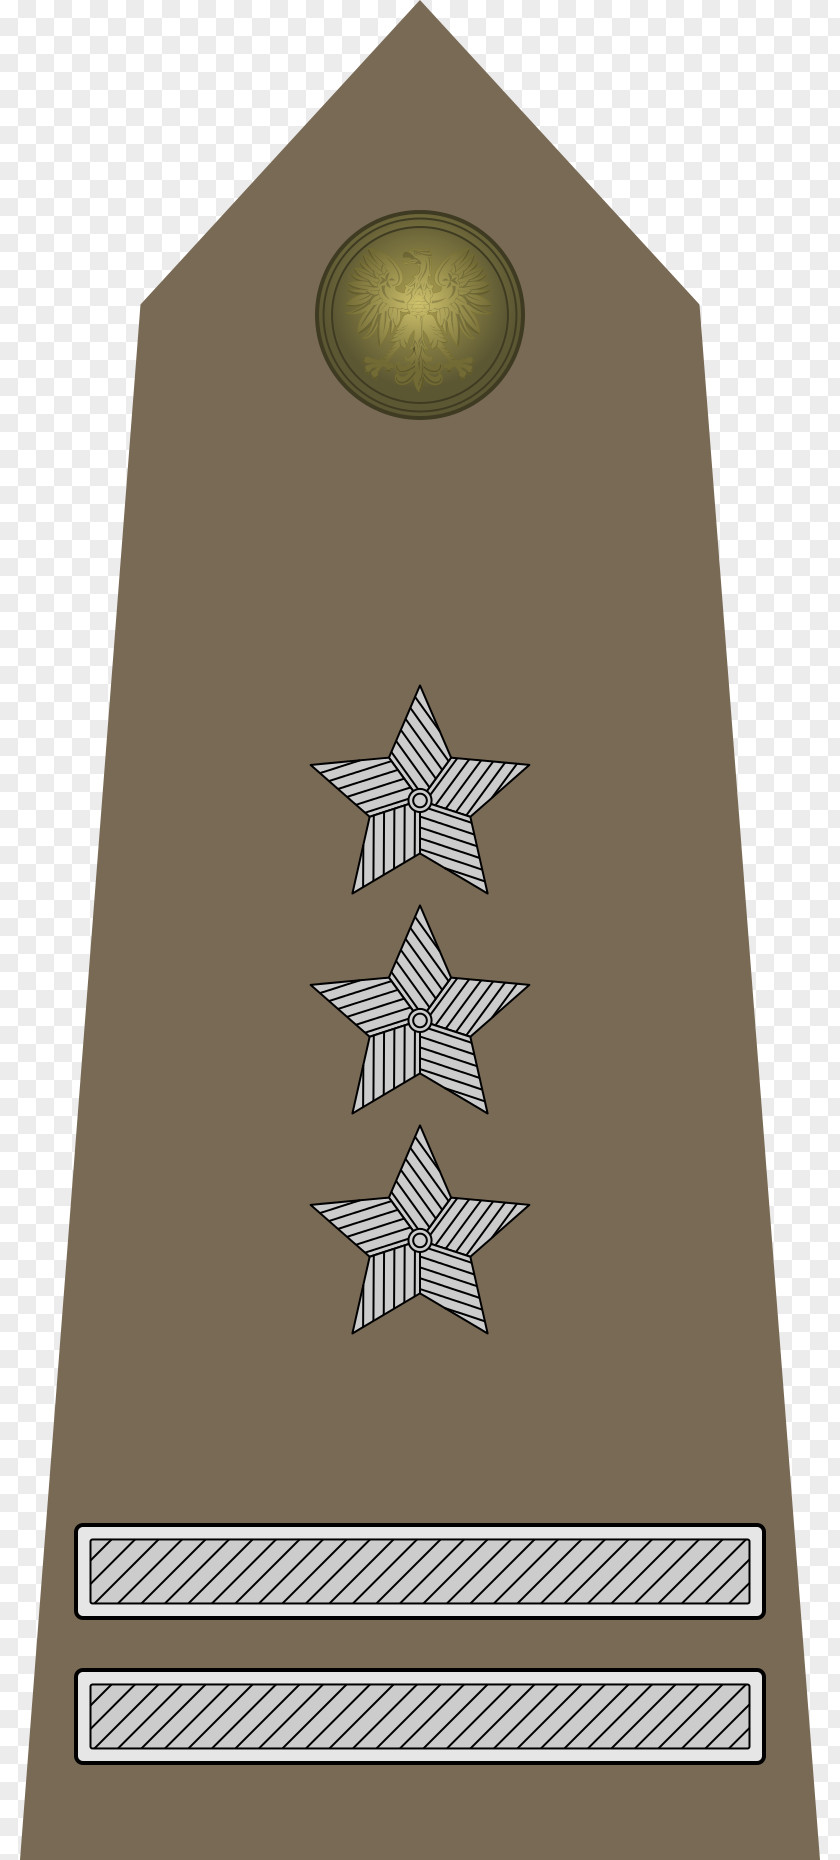 Army Military Rank Major General Officer PNG